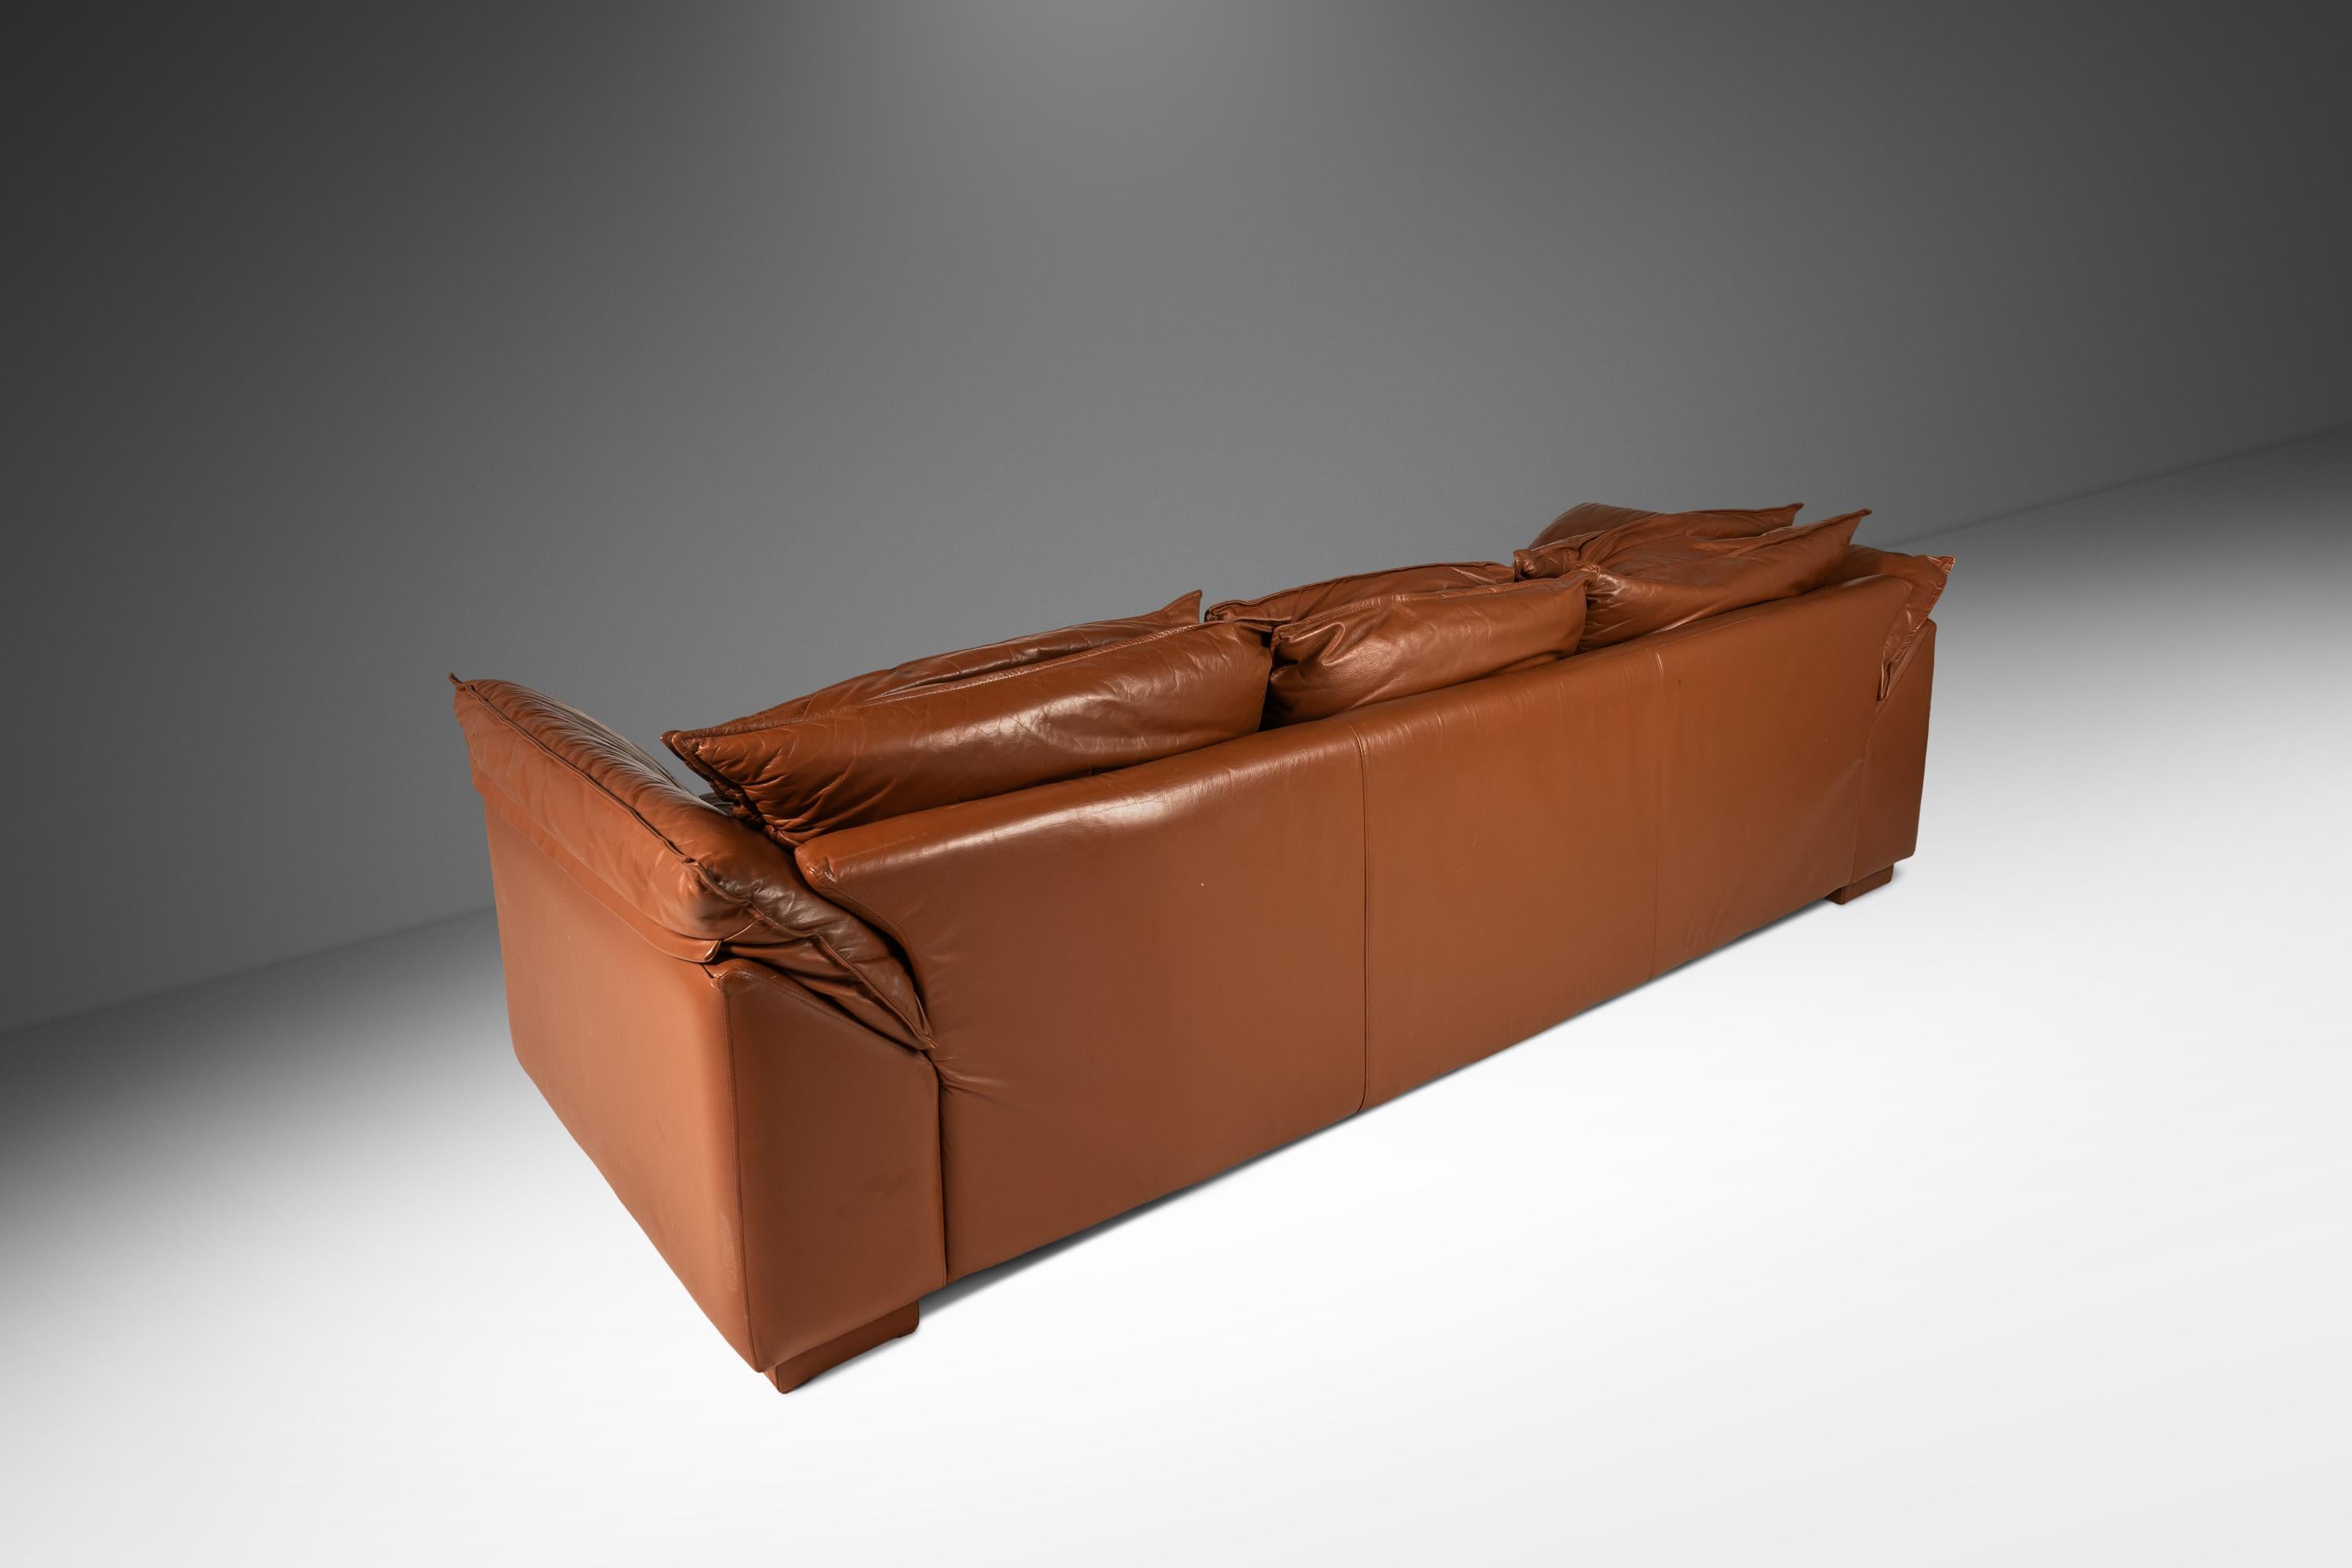 Low Profile Sofa in Cognac Brown Leather in the Manner of Niels Eilersen, 1980's For Sale 9